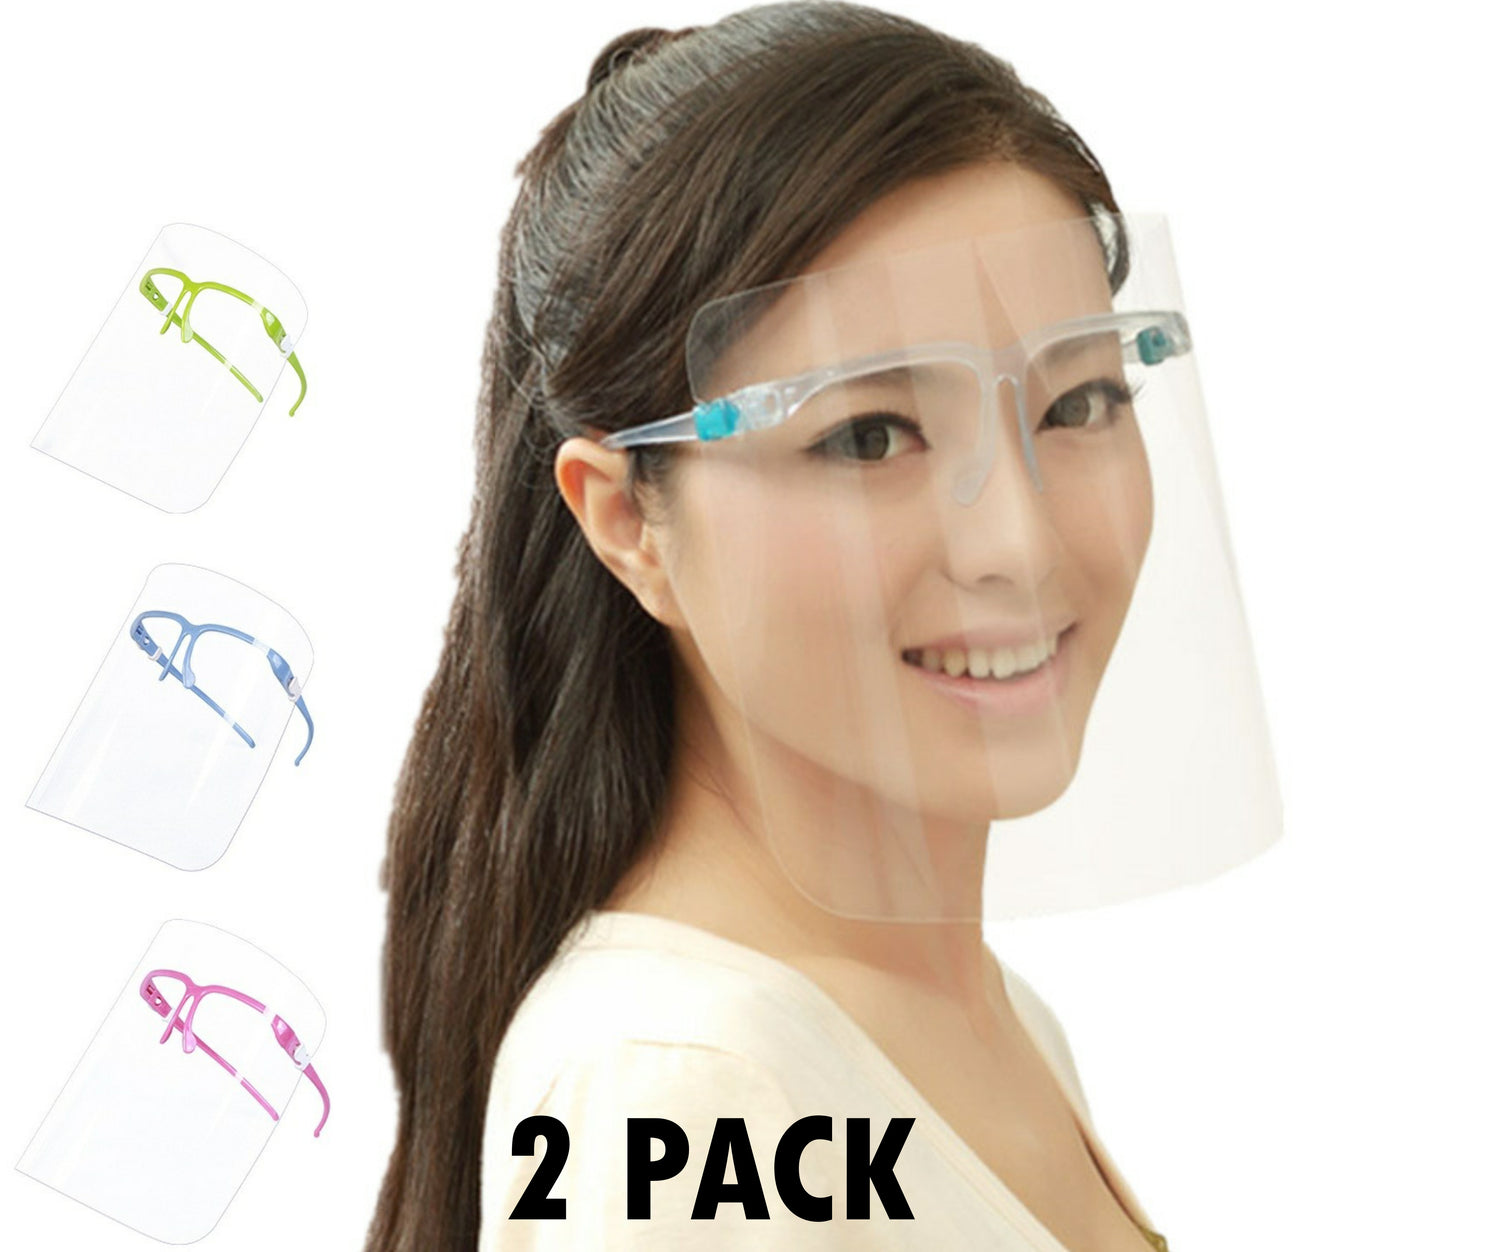 Face Shield Guard Mask Safety Protection With Glasses -2 Pack - USA Medical Supply